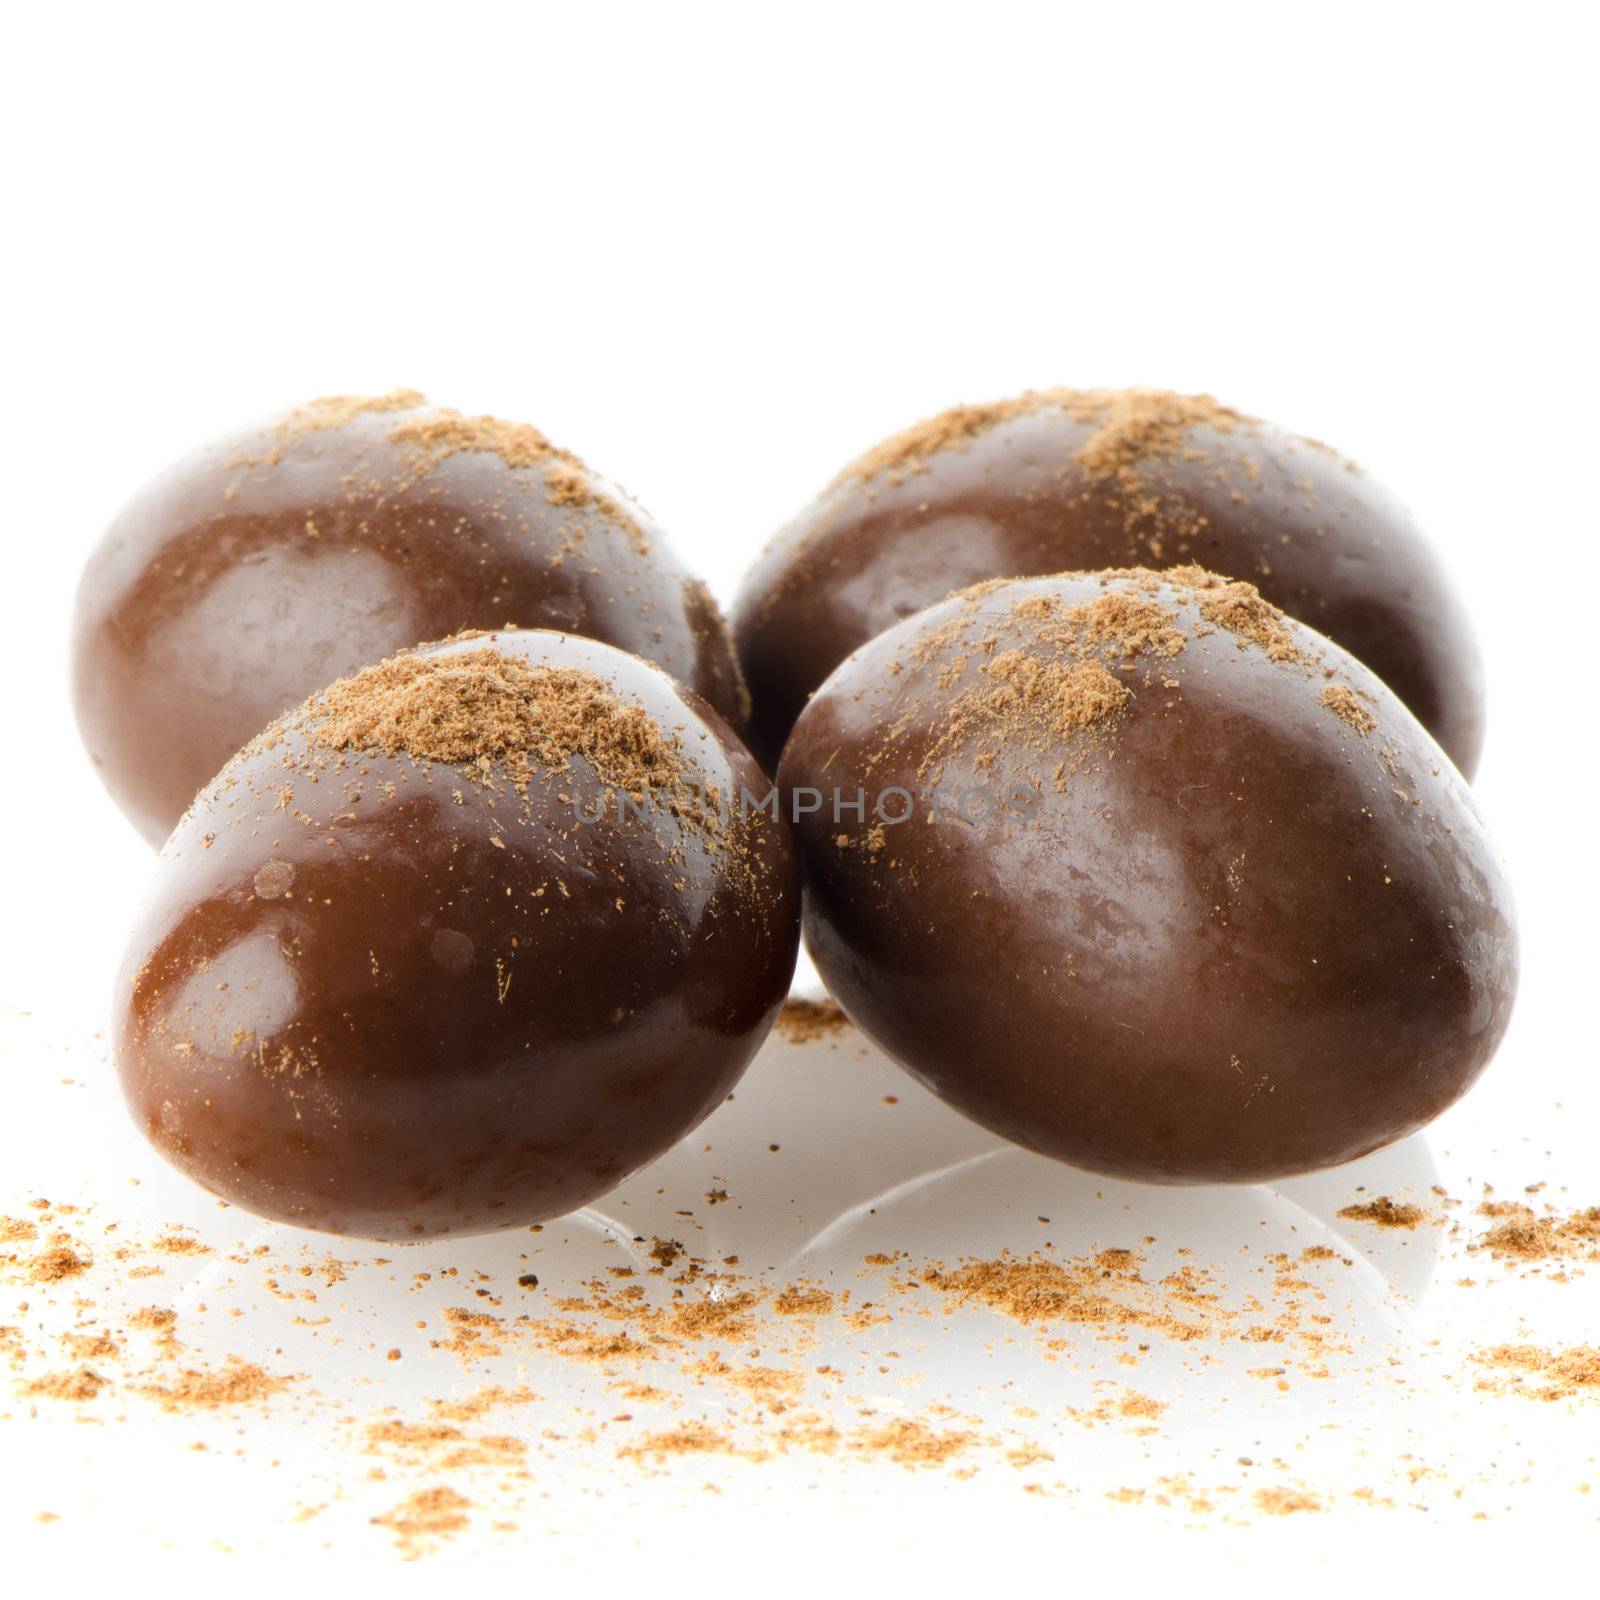 Chocolate candies on white reflective background.